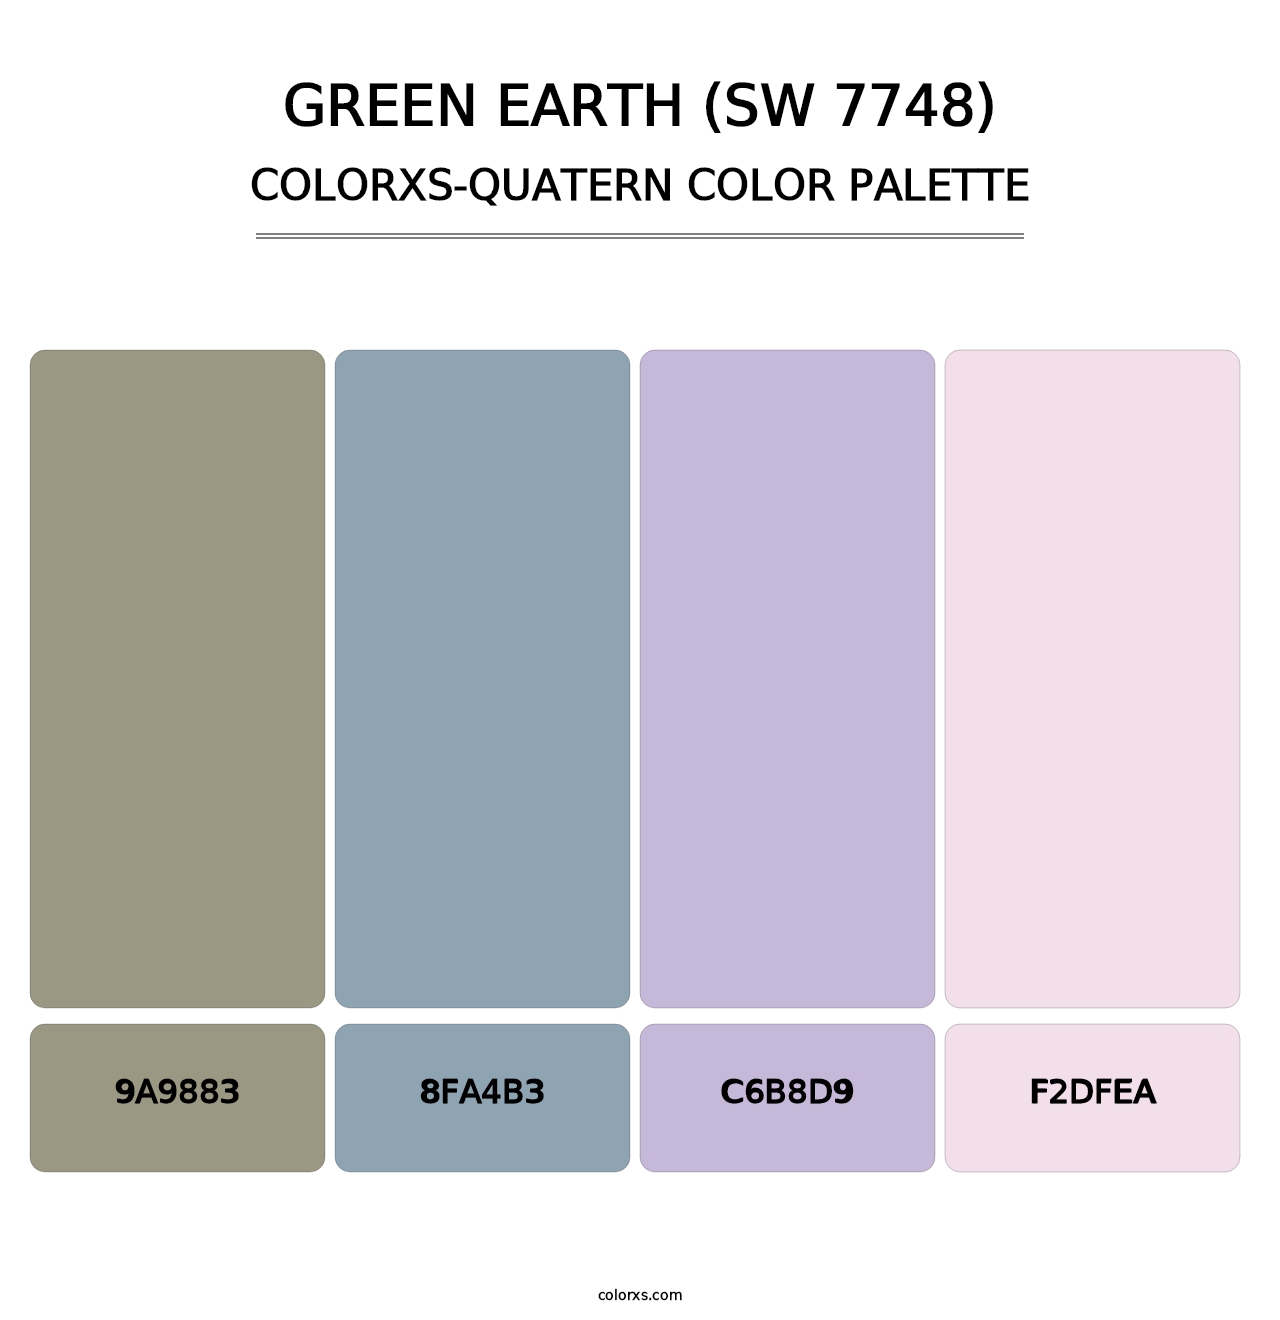 Green Earth (SW 7748) - Colorxs Quatern Palette